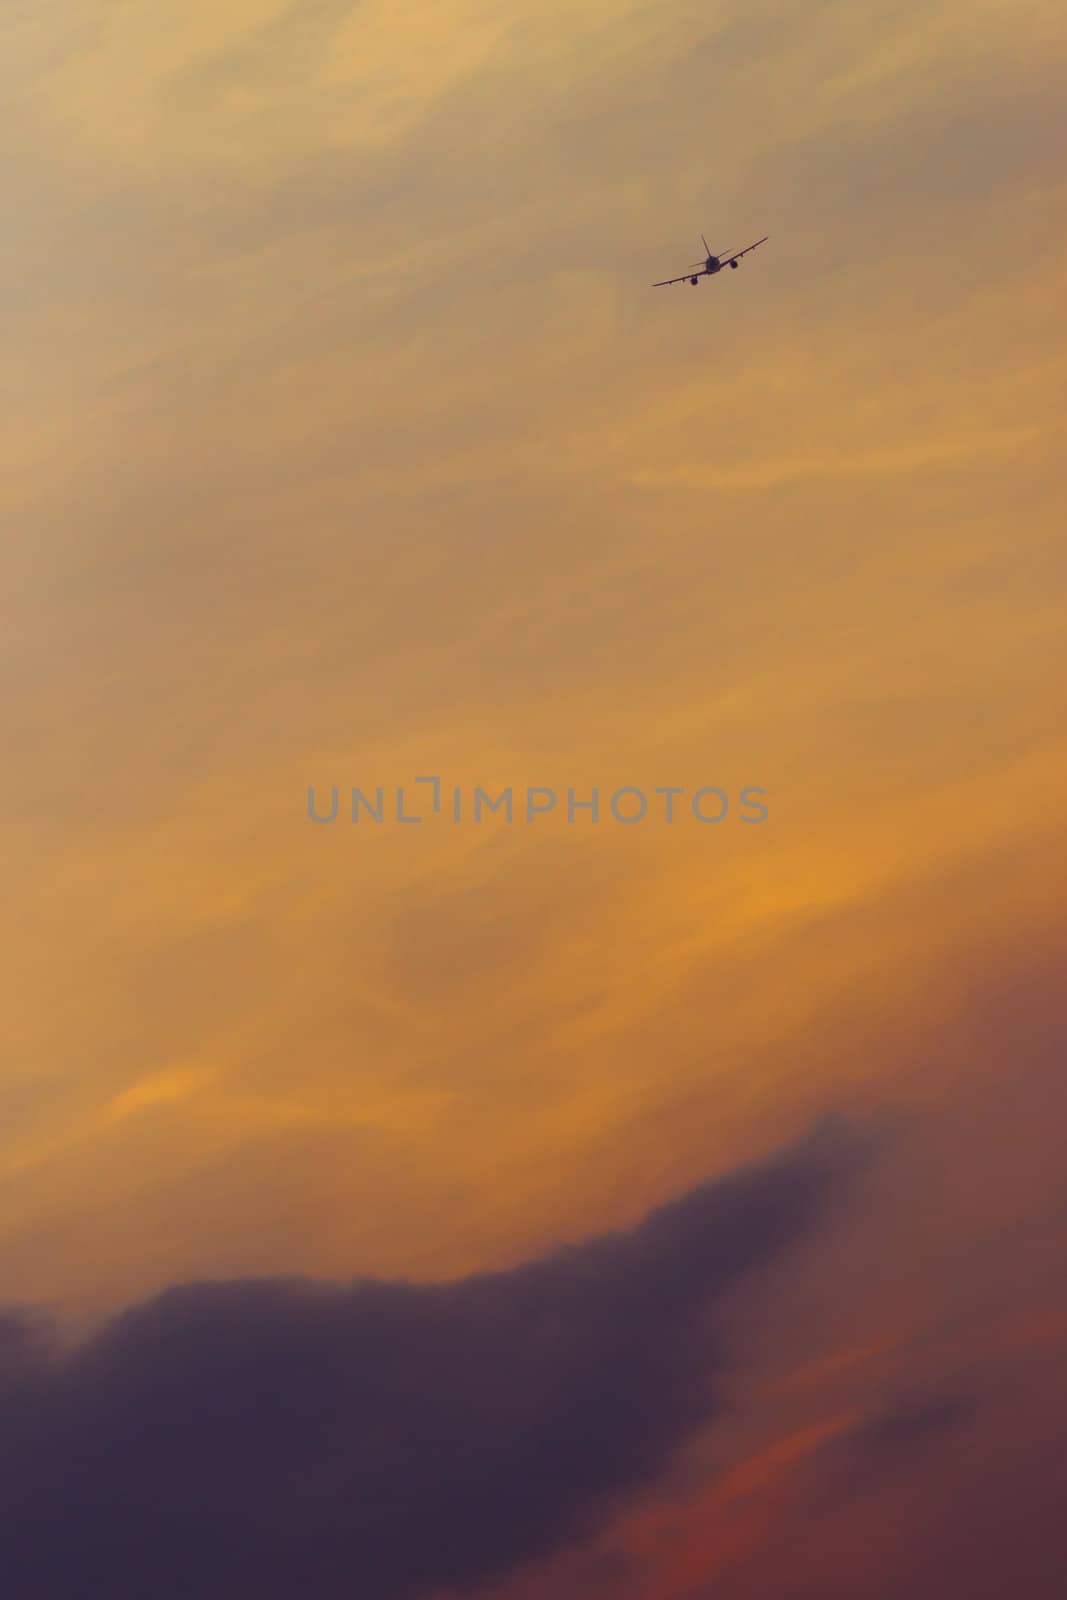 Plane in the sunset sky by timbrk